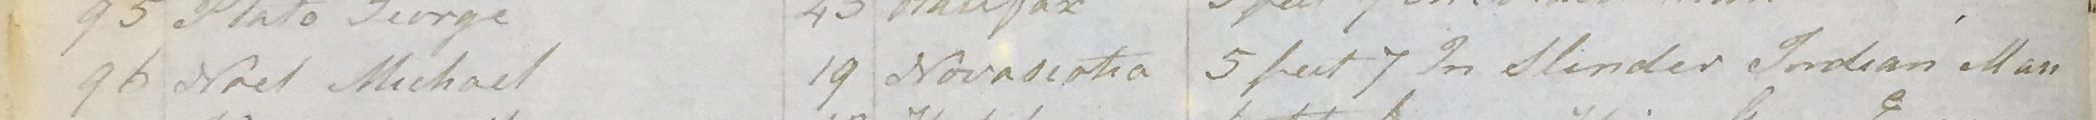 Close up image of a ledger listing name, age, birth place, height, and the description "slender indian man"